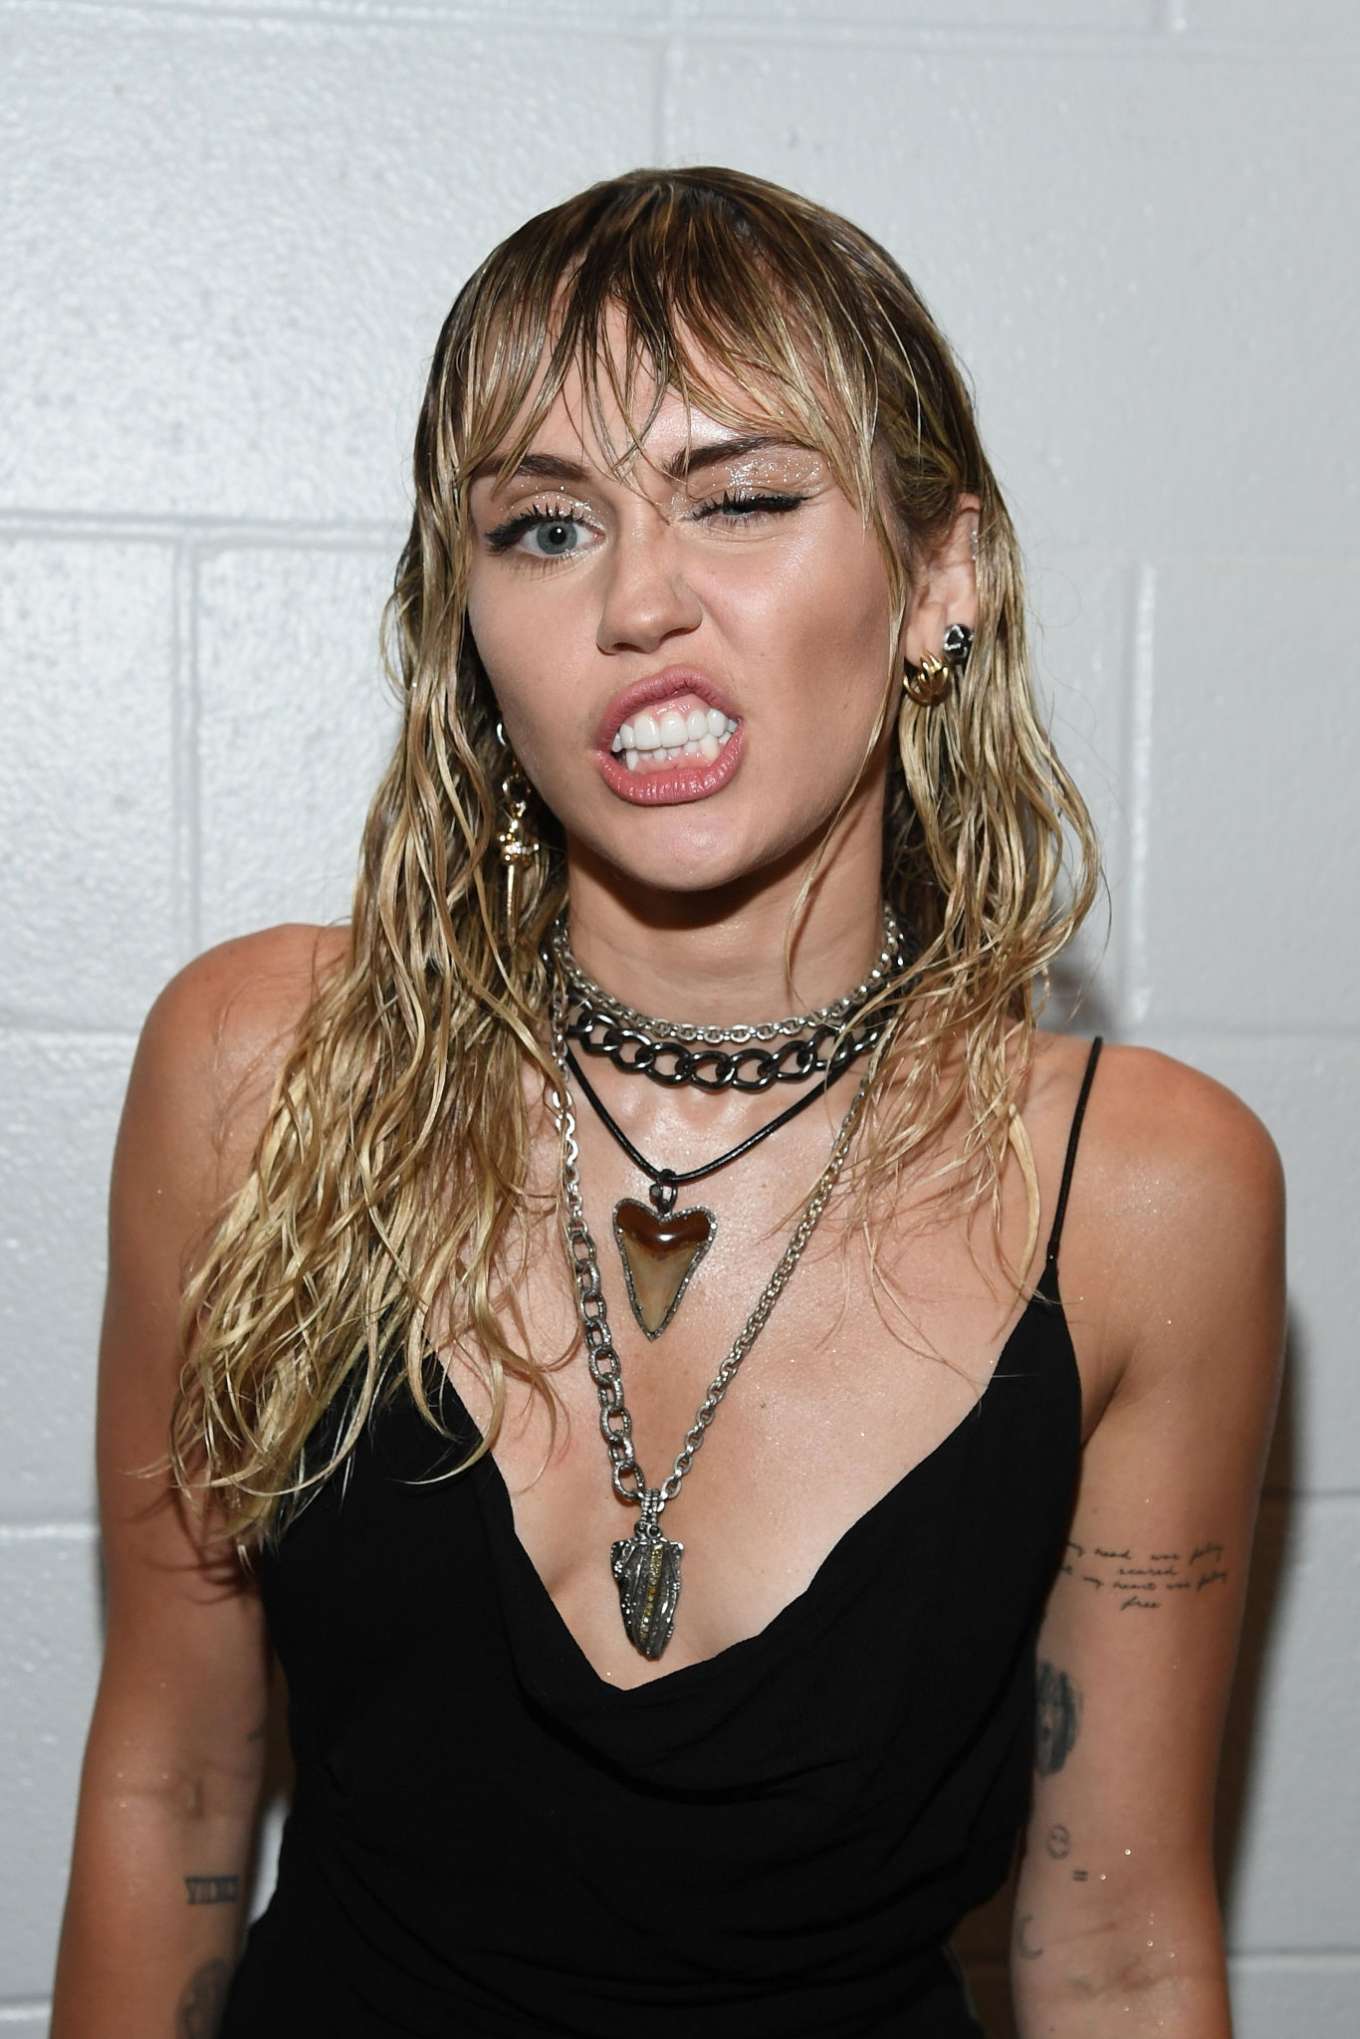 Miley Cyrus â€“ Backstage photoshoot at the 2019 MTV Video Music Awards